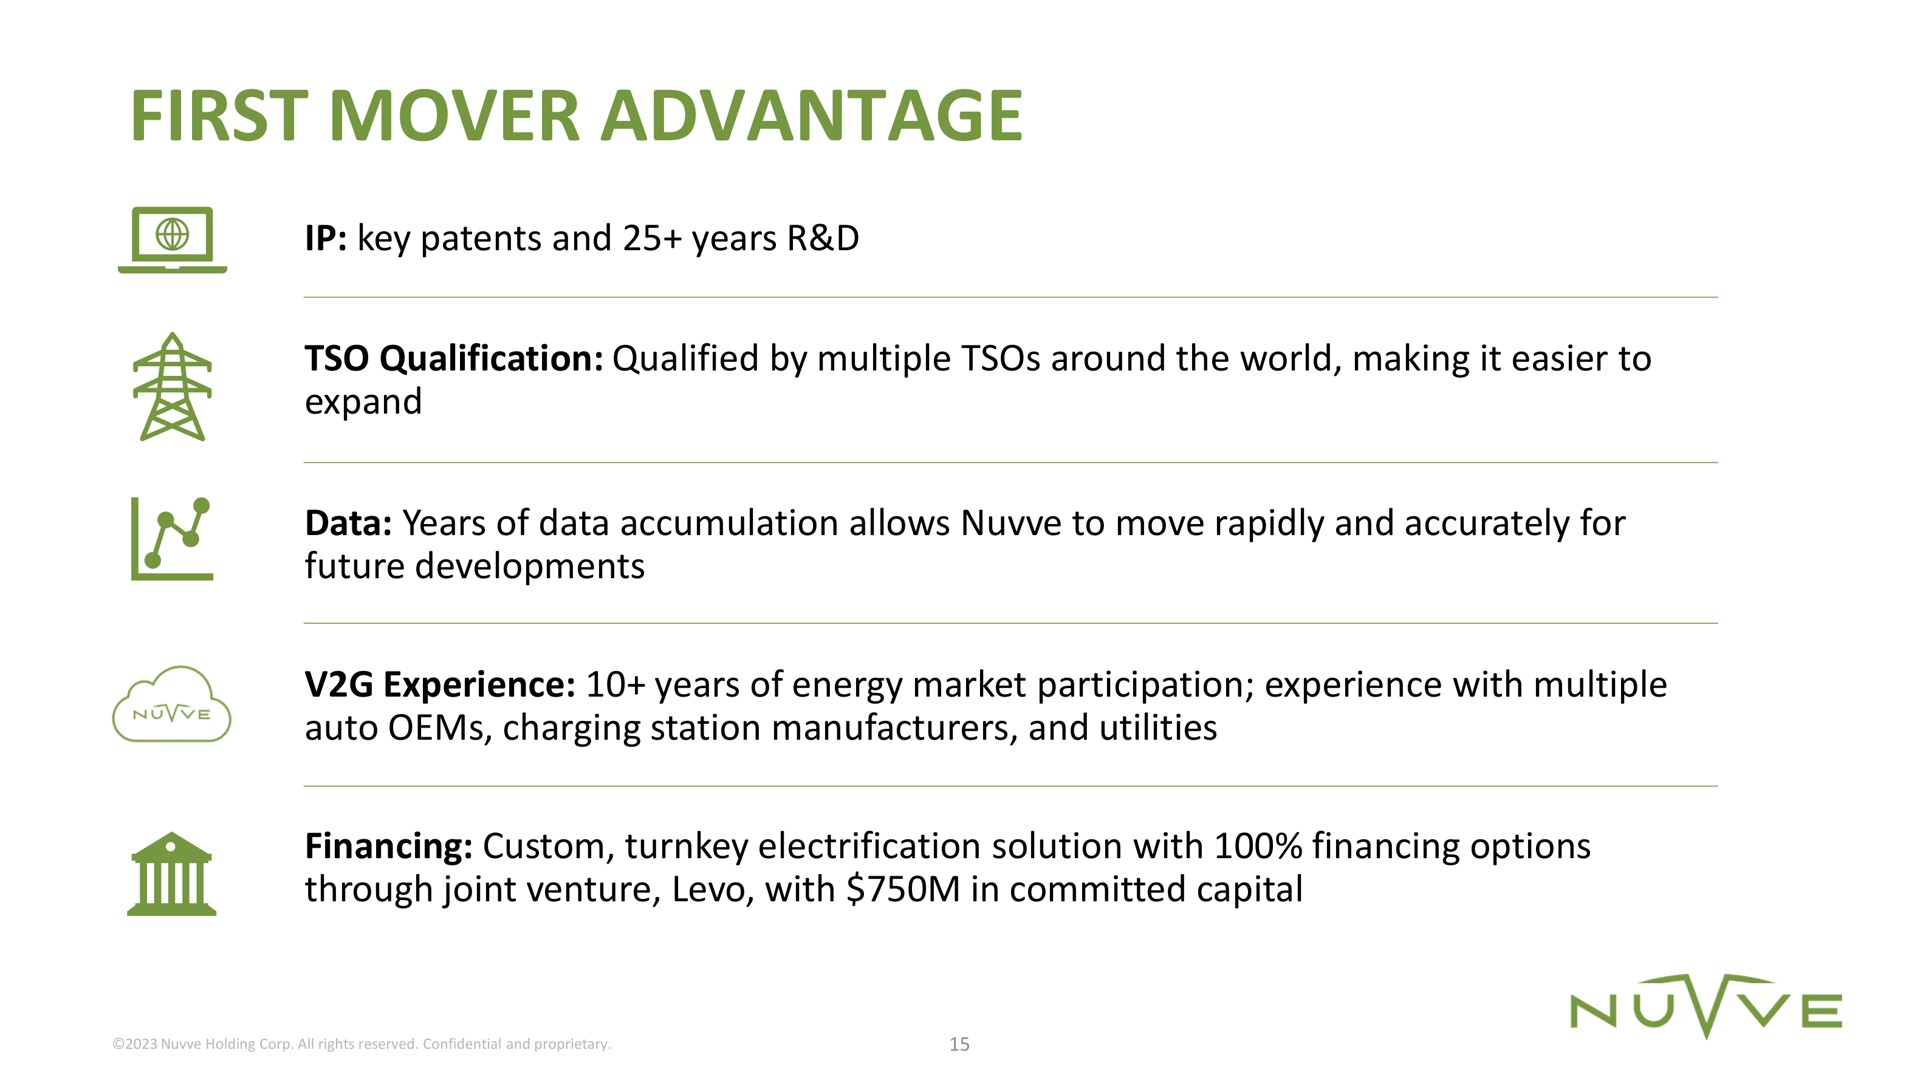 first mover advantage key patents and years | Nuvve